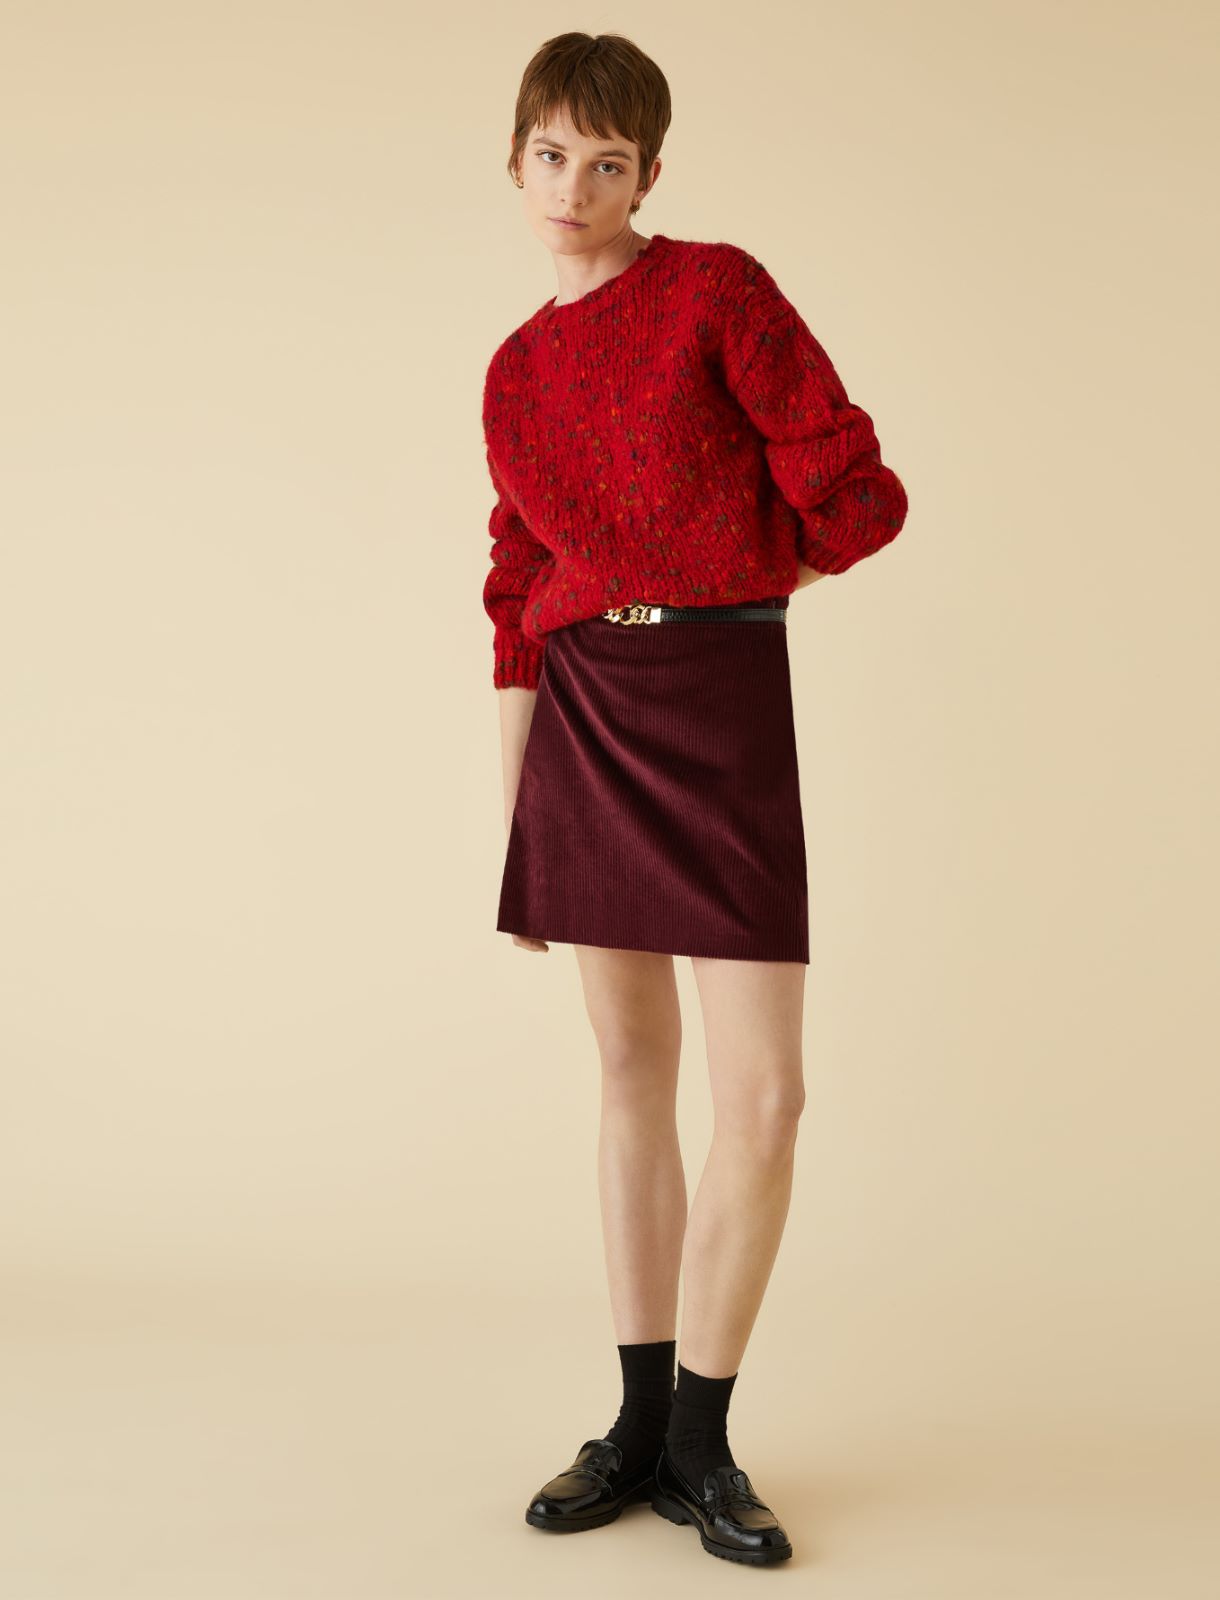 Patterned sweater - Sour cherry - Marella